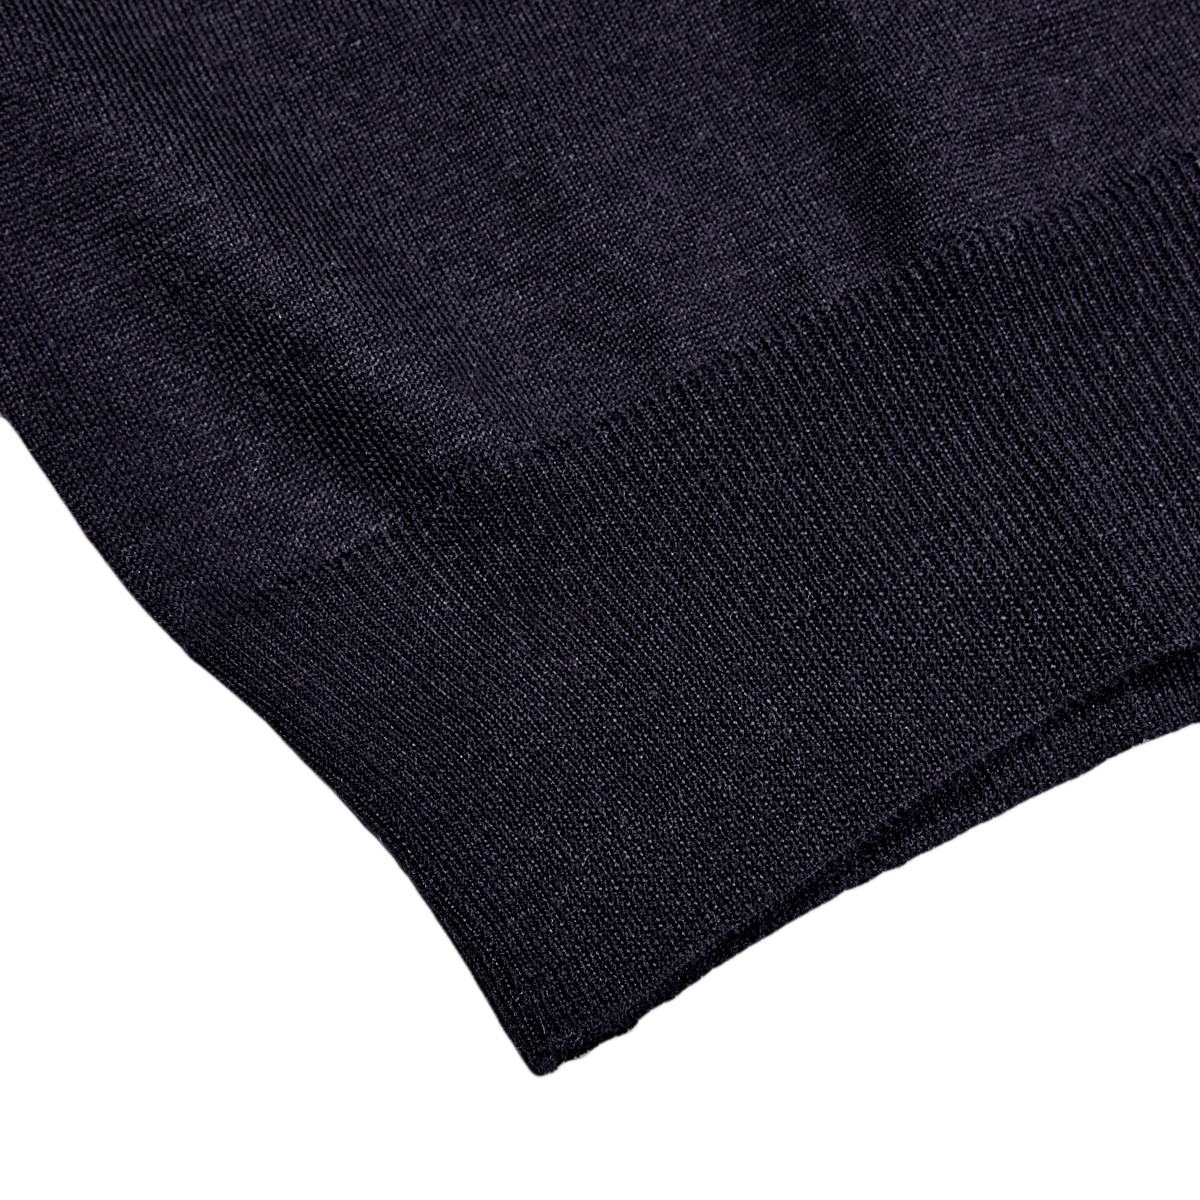 A close up of a Fedeli Navy 140s Wool Mockneck Sweater on a white surface.